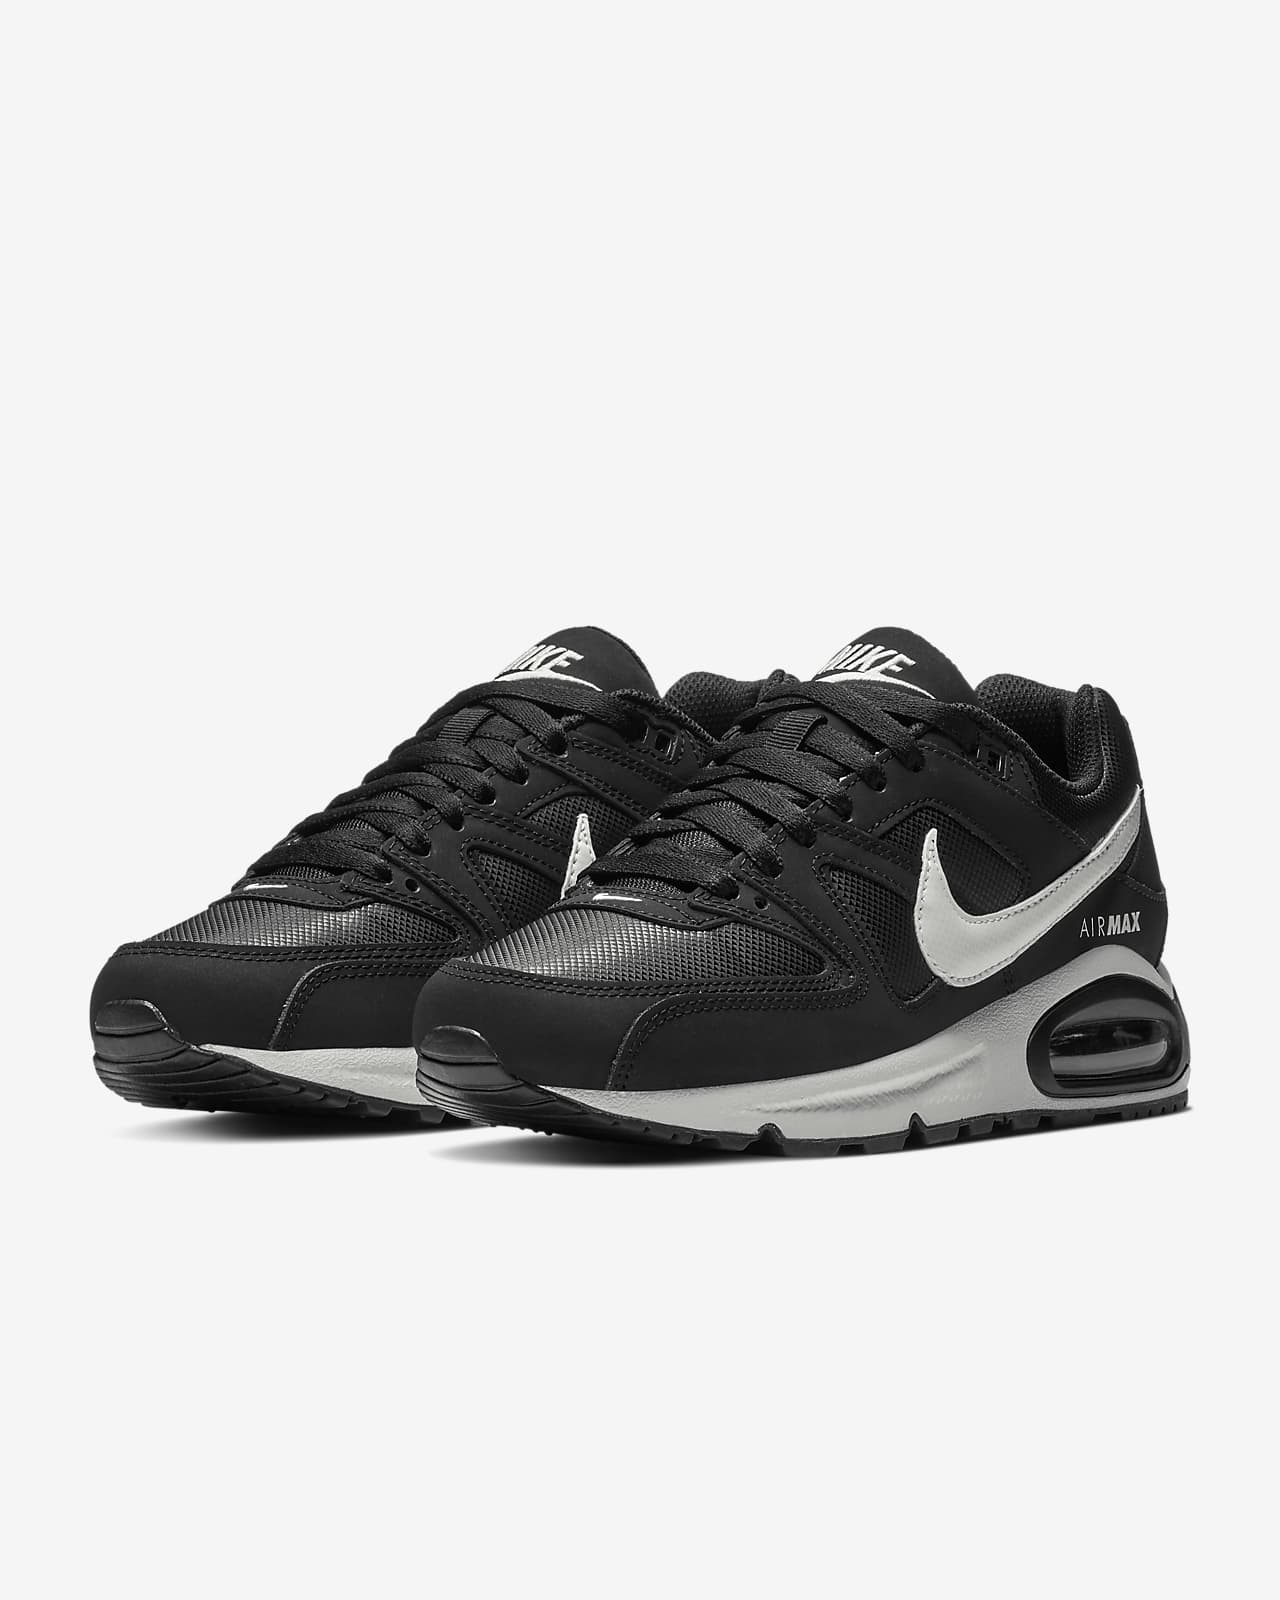 Tenis Nike Wmns Air Max Command 397690021